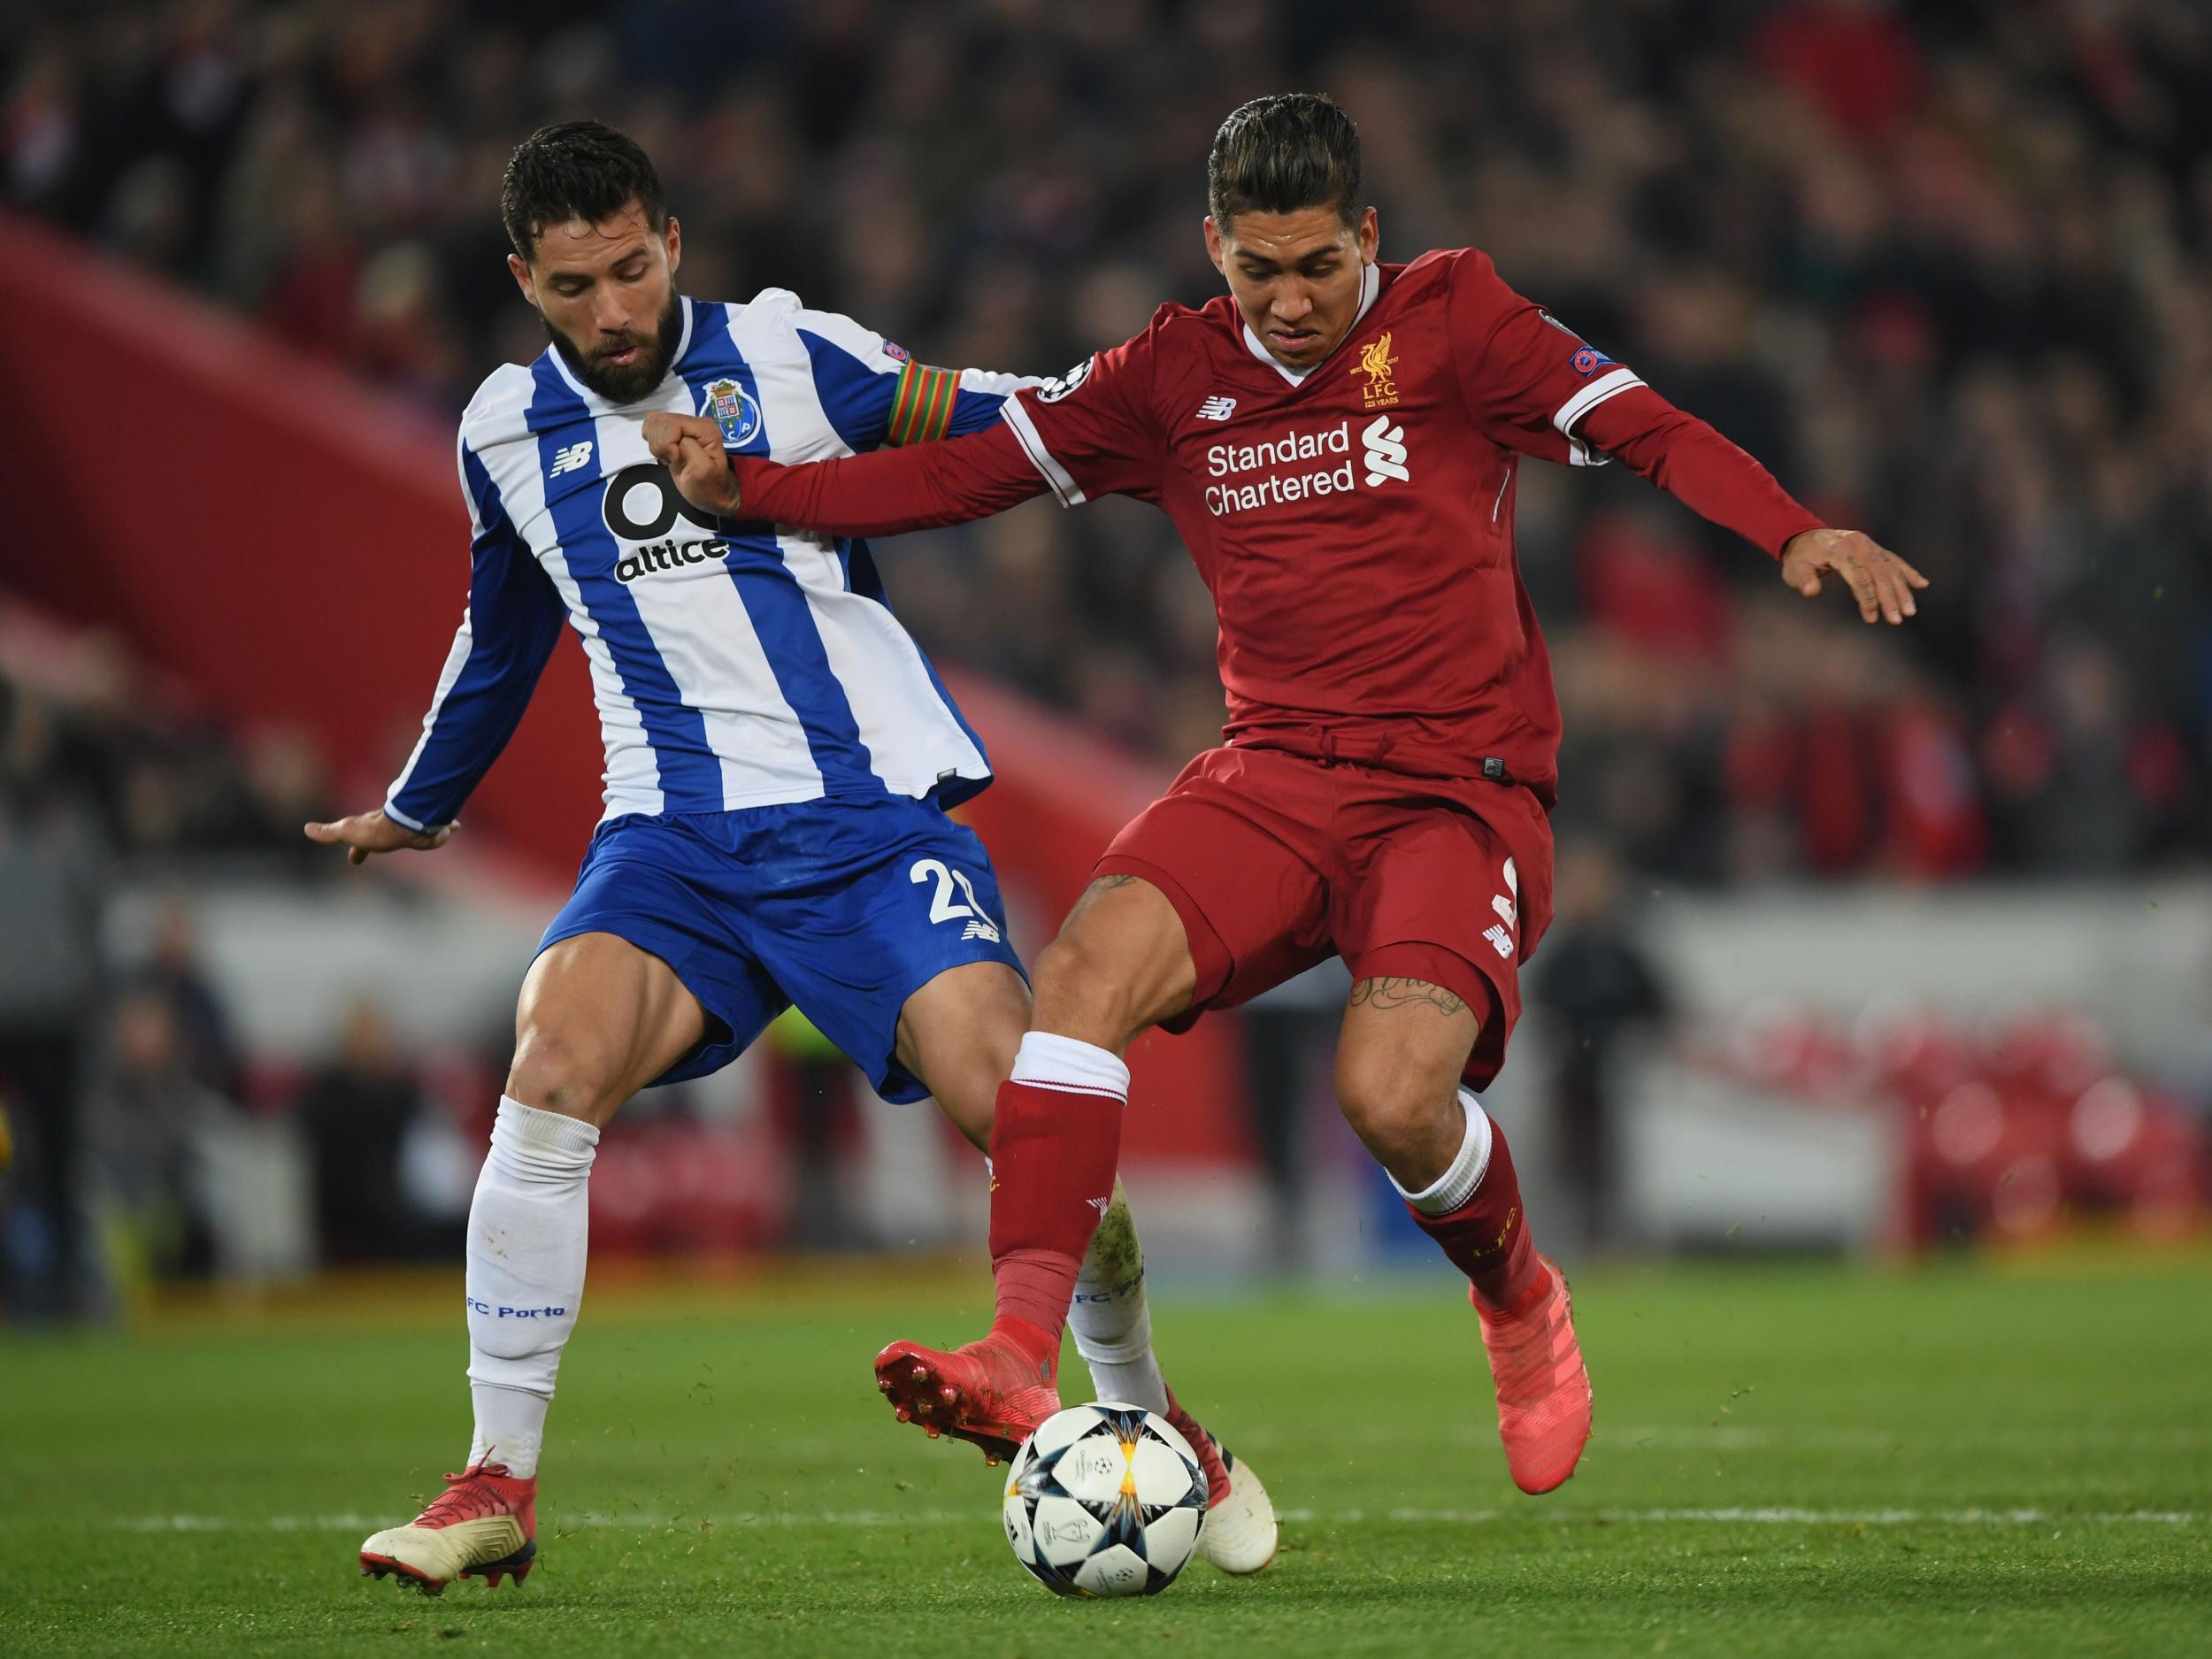 Roberto Fimino believes Liverpool can beat any English club in Europe